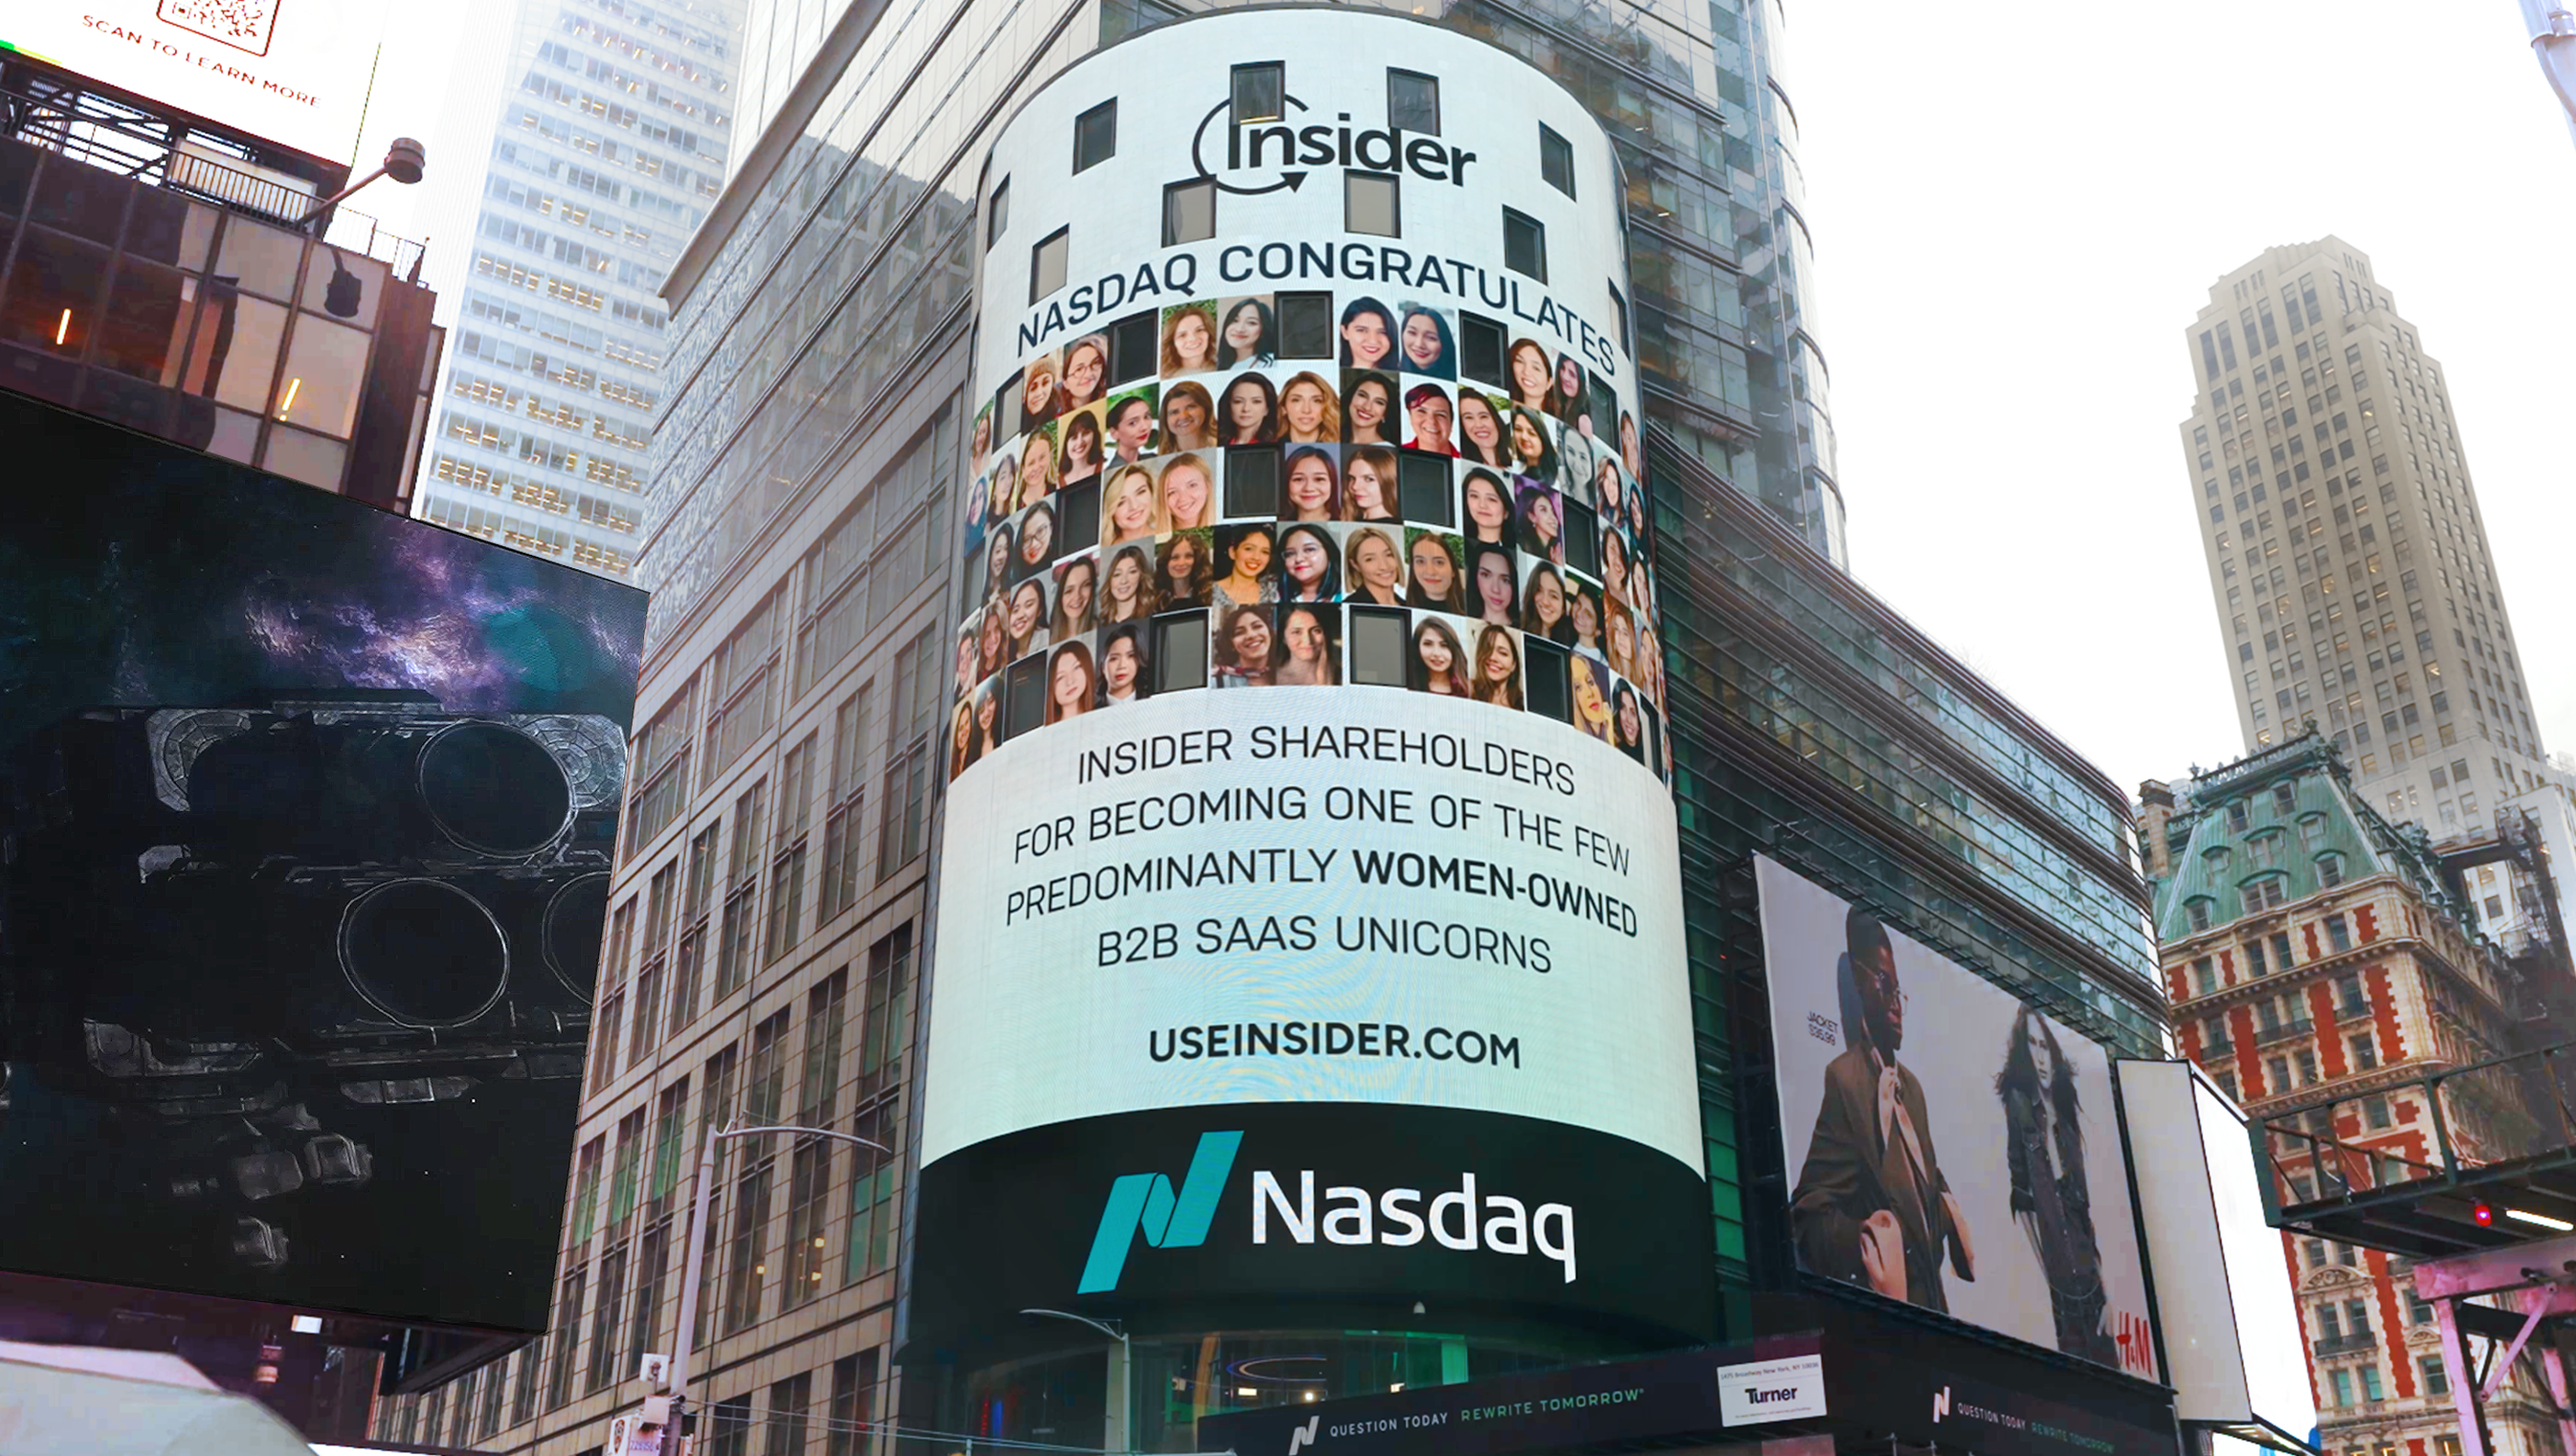 NASDAQ Celebrates Insider Shareholders For Unlocking $200M USD CARR for becoming one of the few predominantly women-owned B2B SaaS unicorns to unlock $200M CARR.